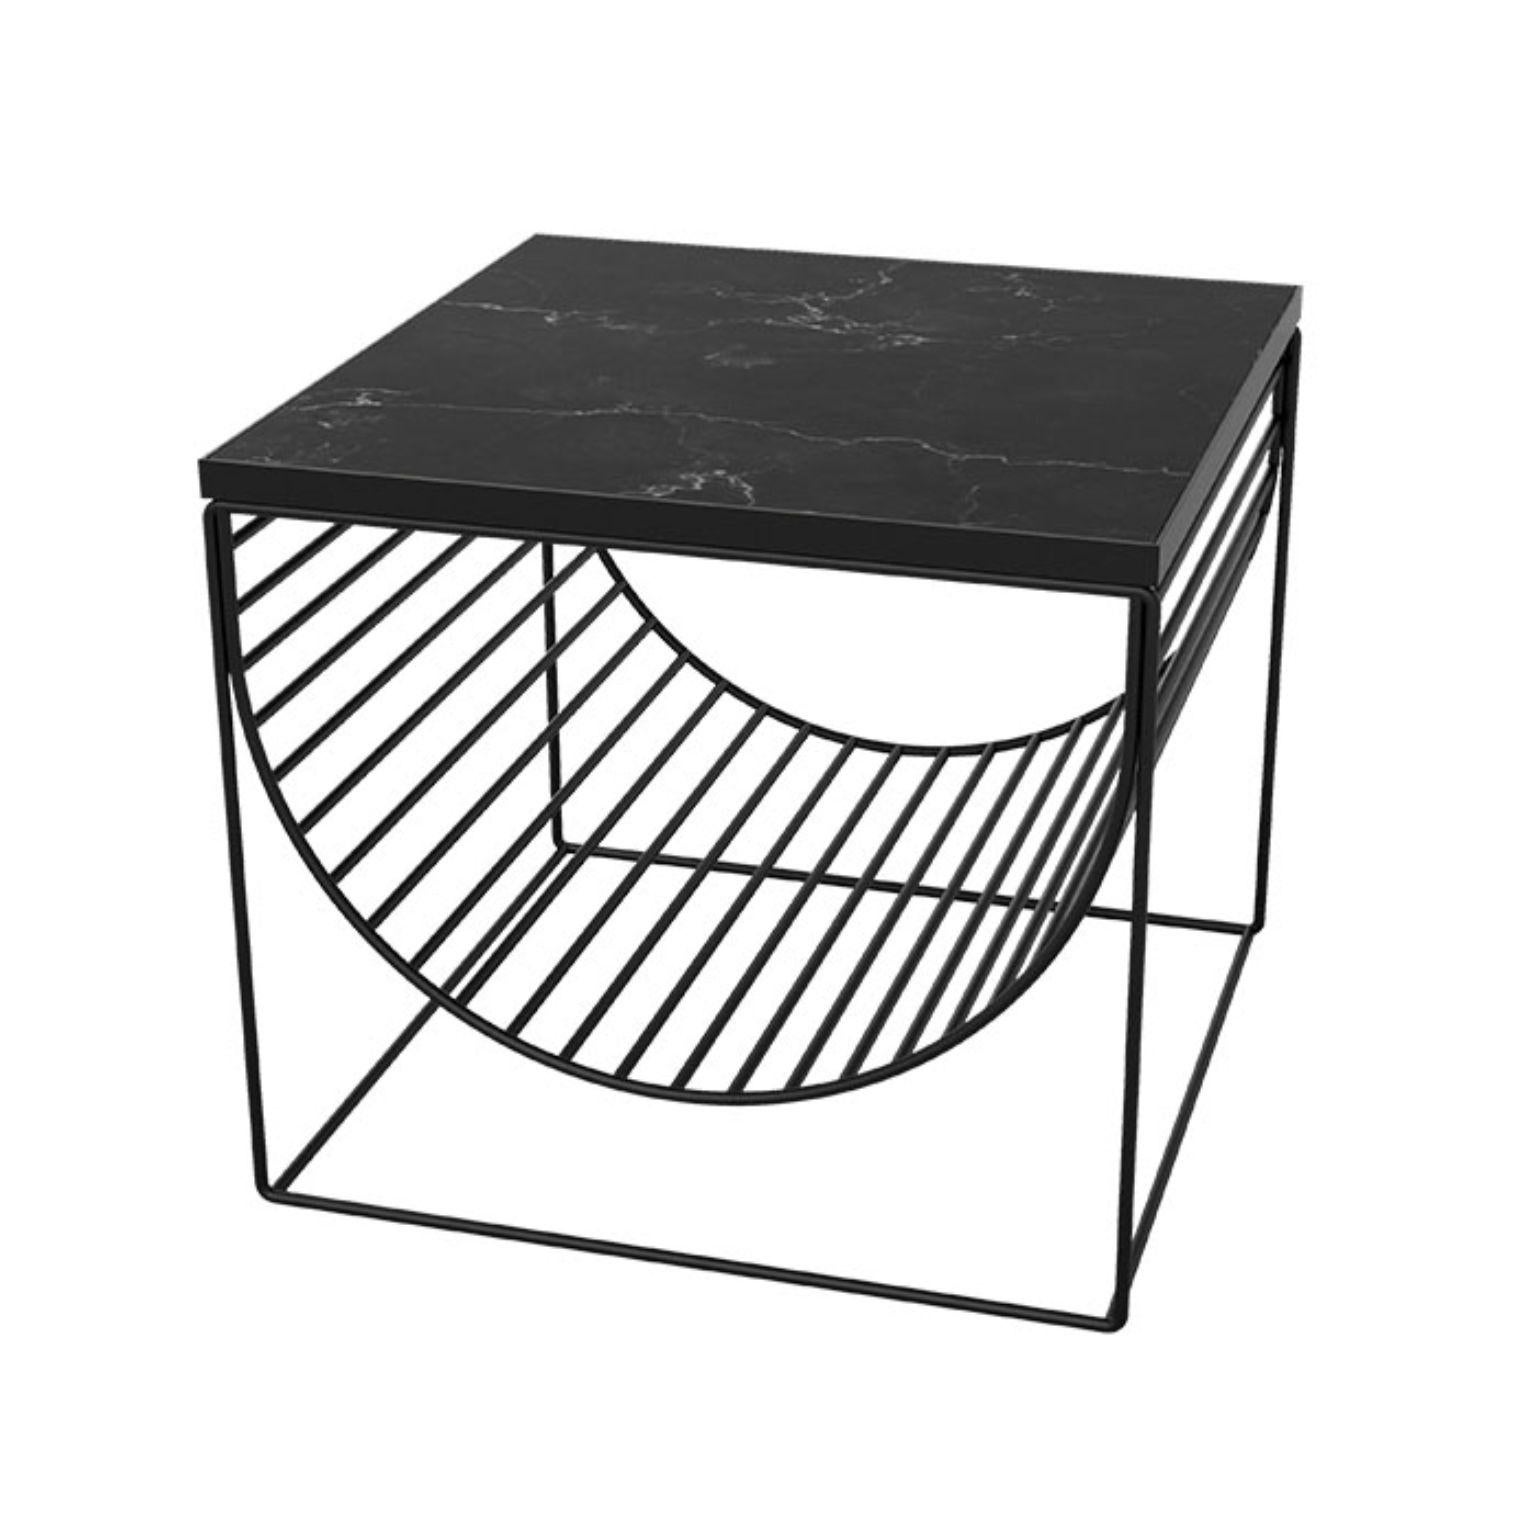 Black marble and steel side table
Dimensions: L 50 x W 50 x H 44.3 cm
Materials: Marble, steel  

This series consists of three different designs that you can combine in many different ways. The table tops come in two different colored luxurious